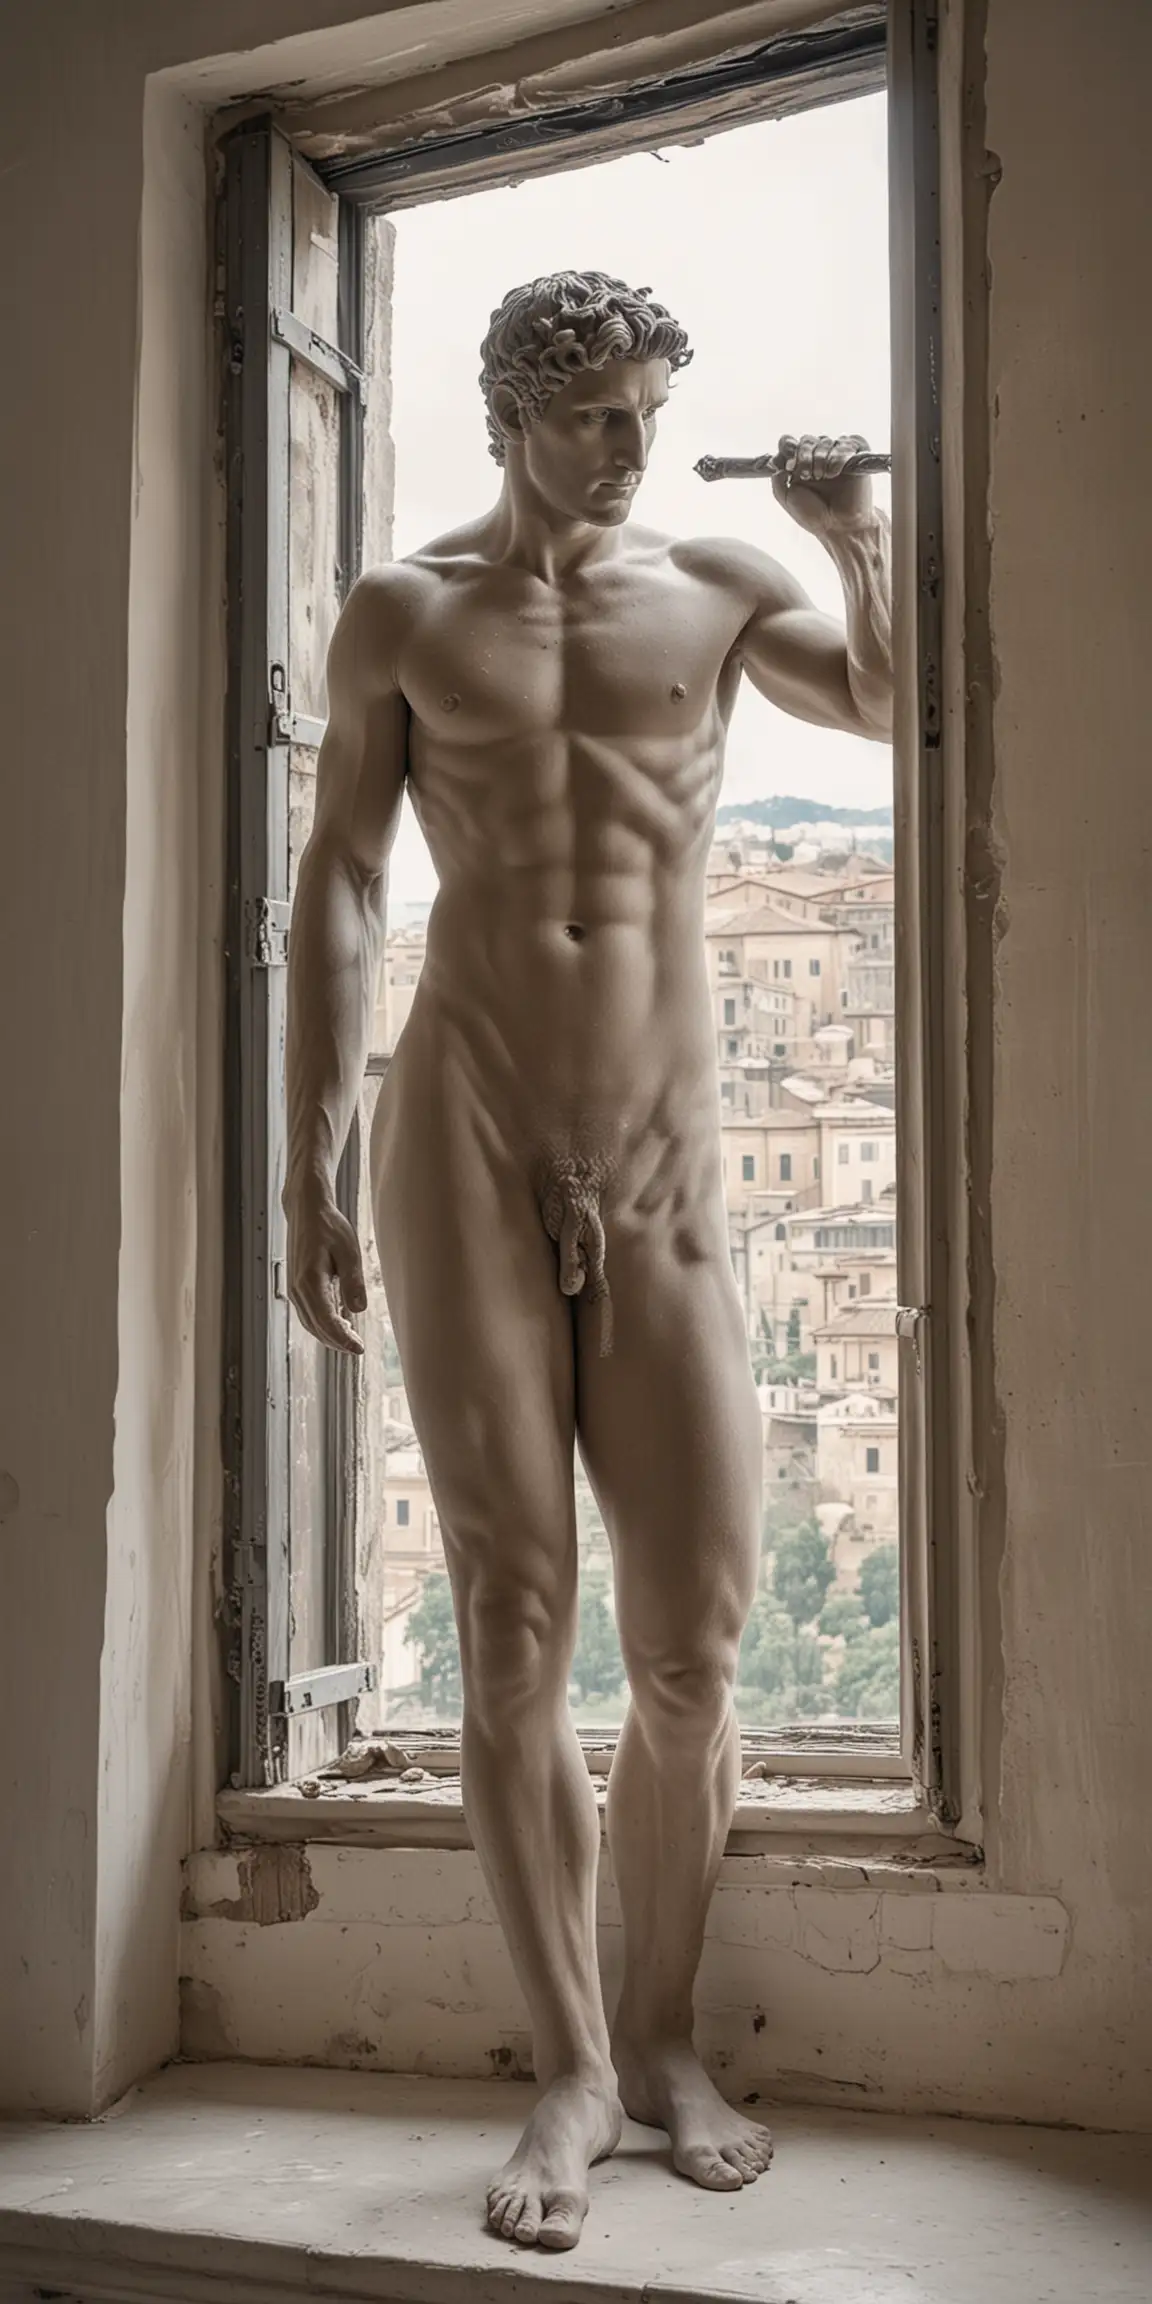 Naked Roman Statue with Empire View through Window